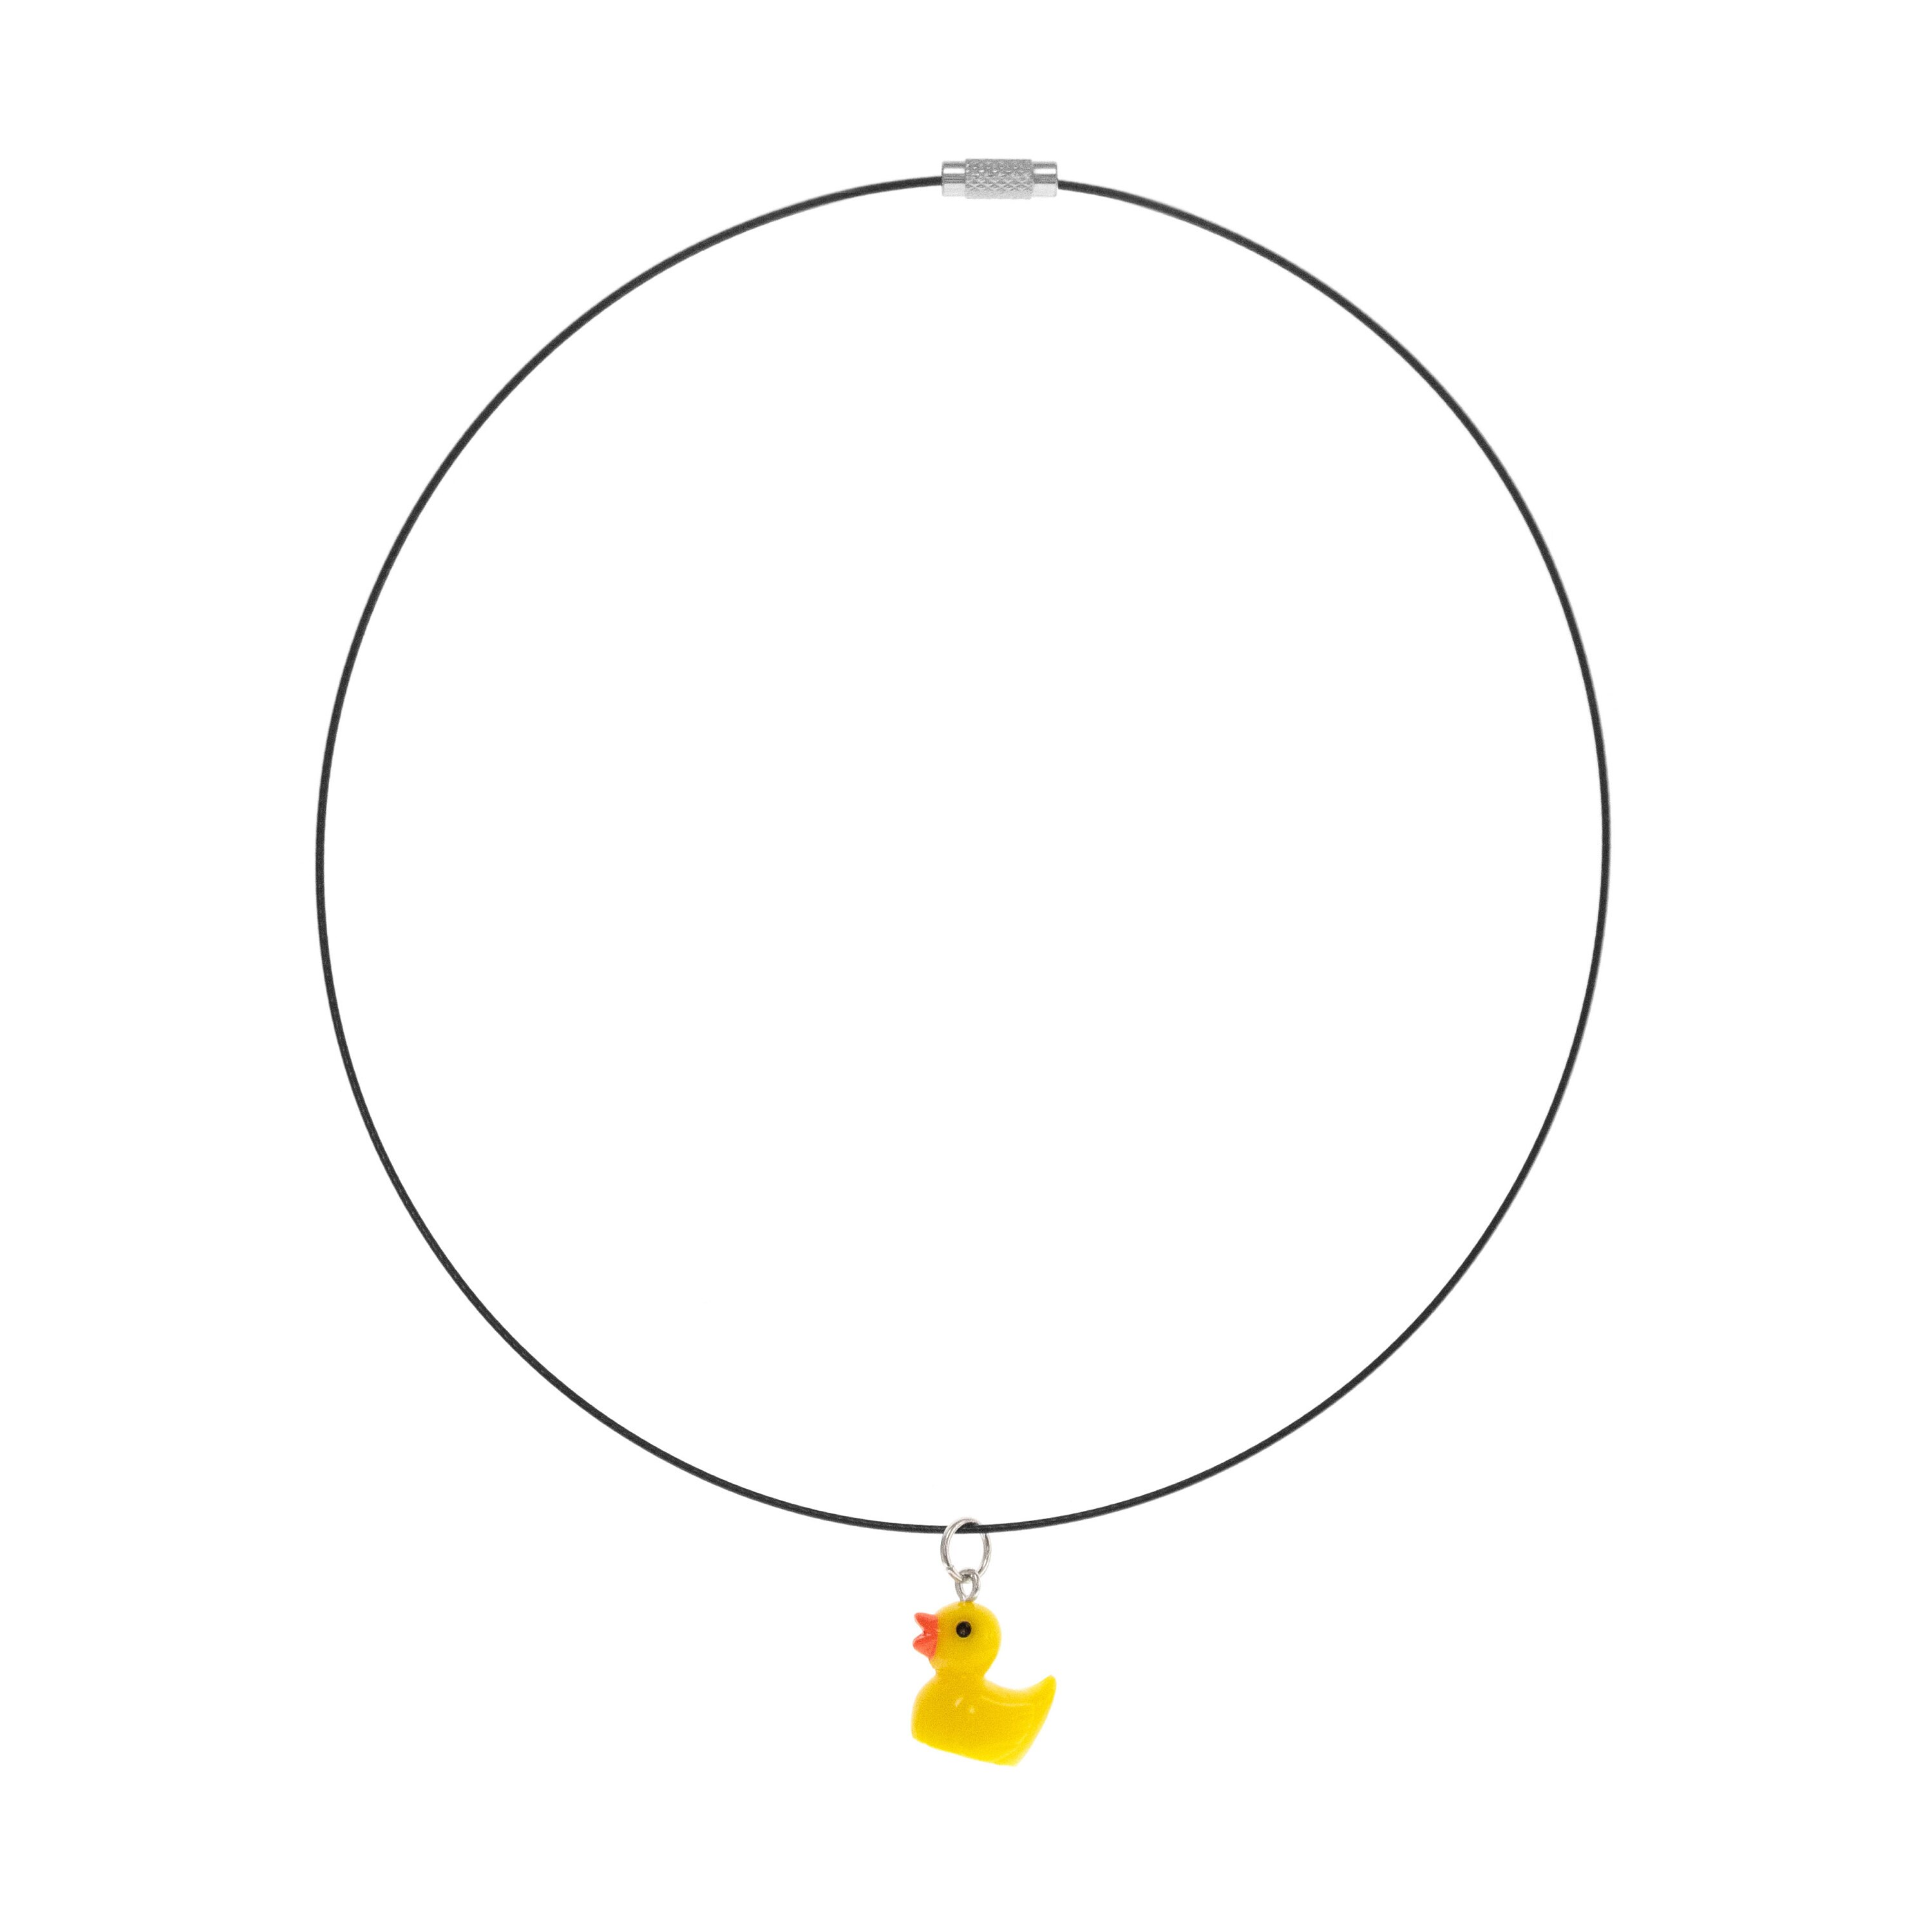 coding duck necklace with yellow rubber duck